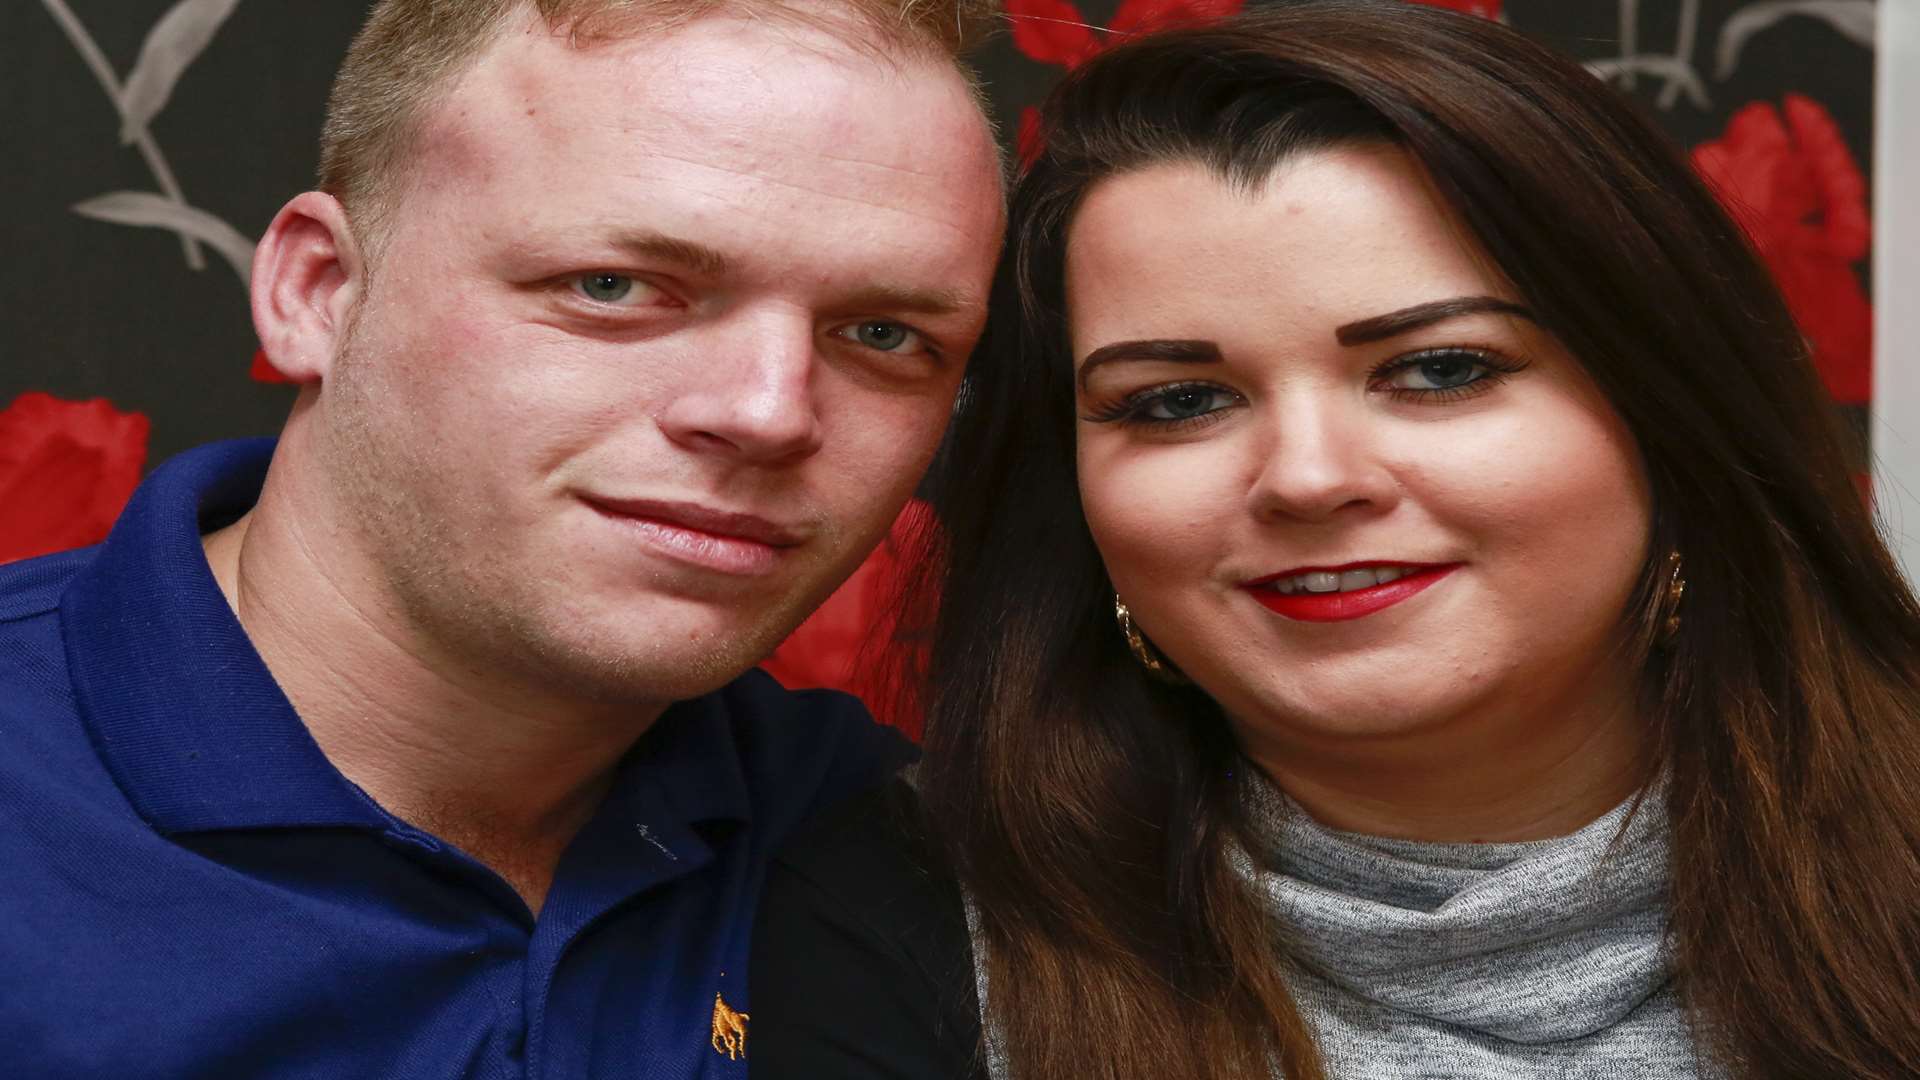 John and Laura Beeney are fundraising to have IVF because they were refused funding on the NHS